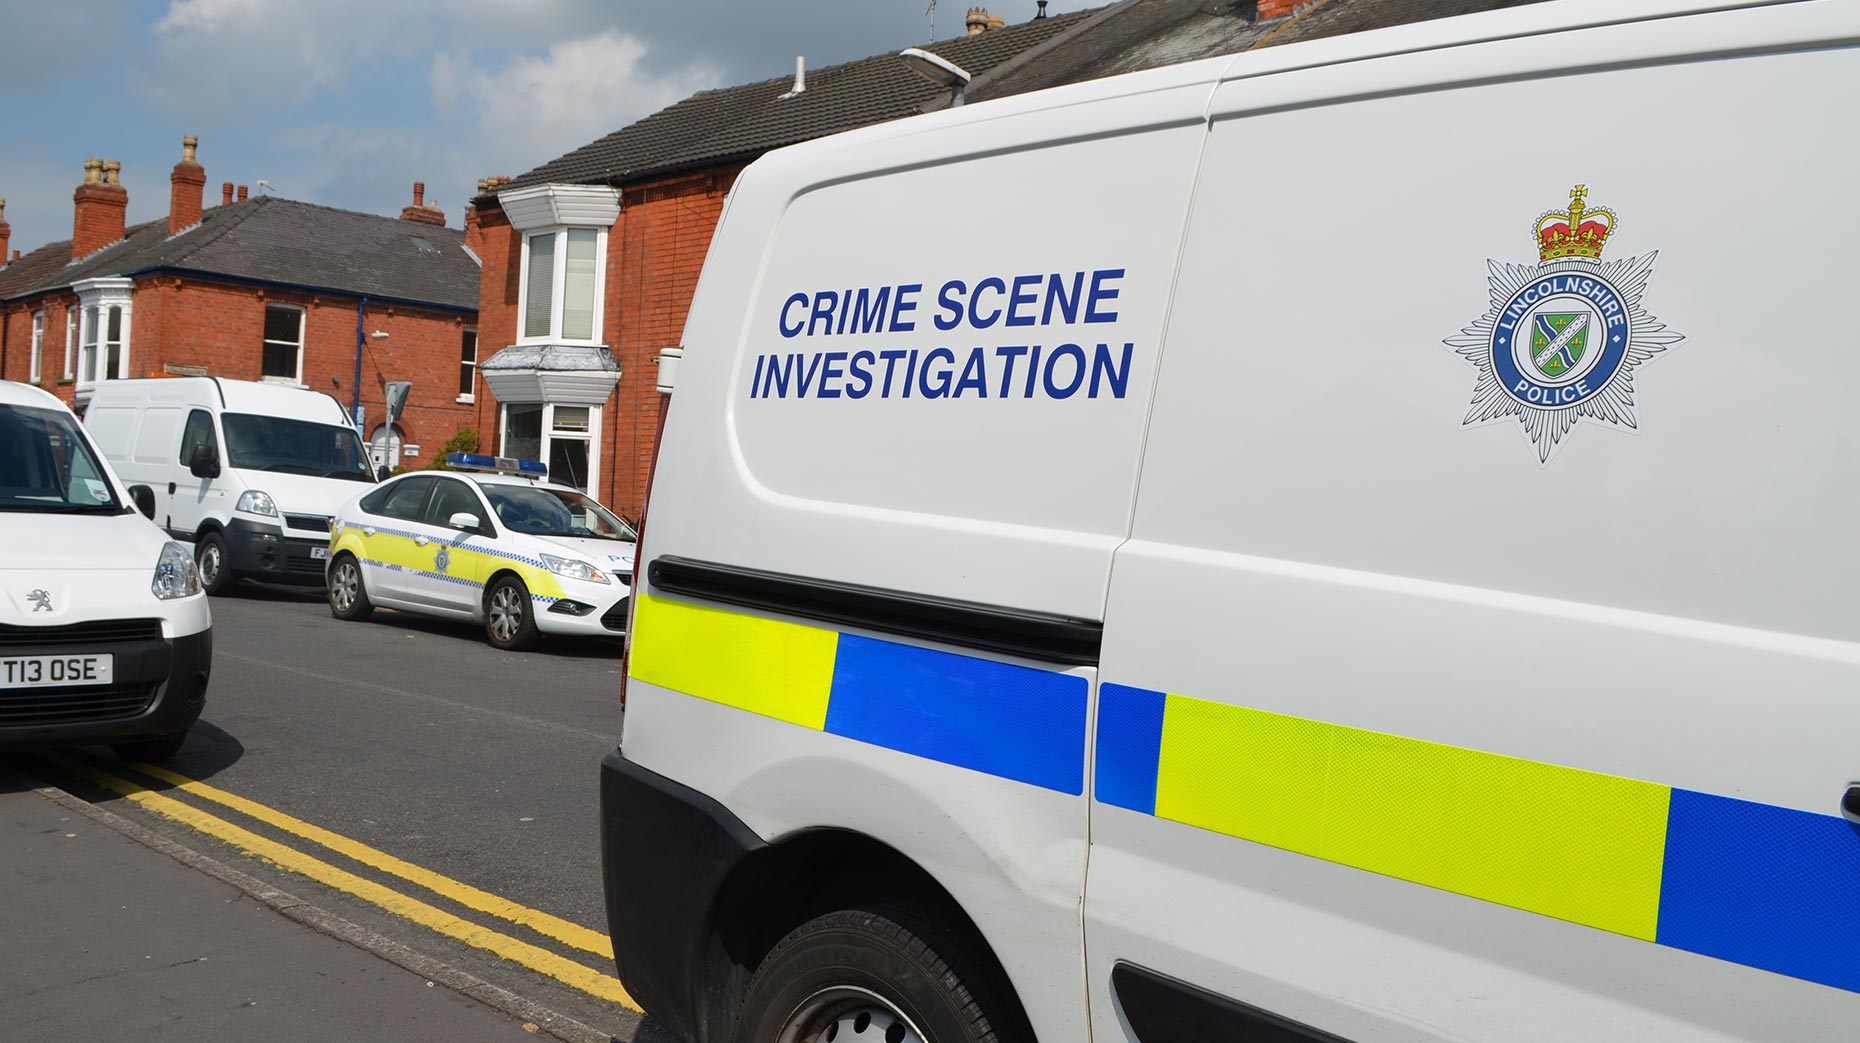 Forensic teams are still on the scene in Sincil Bank. Photo: The Lincolnite